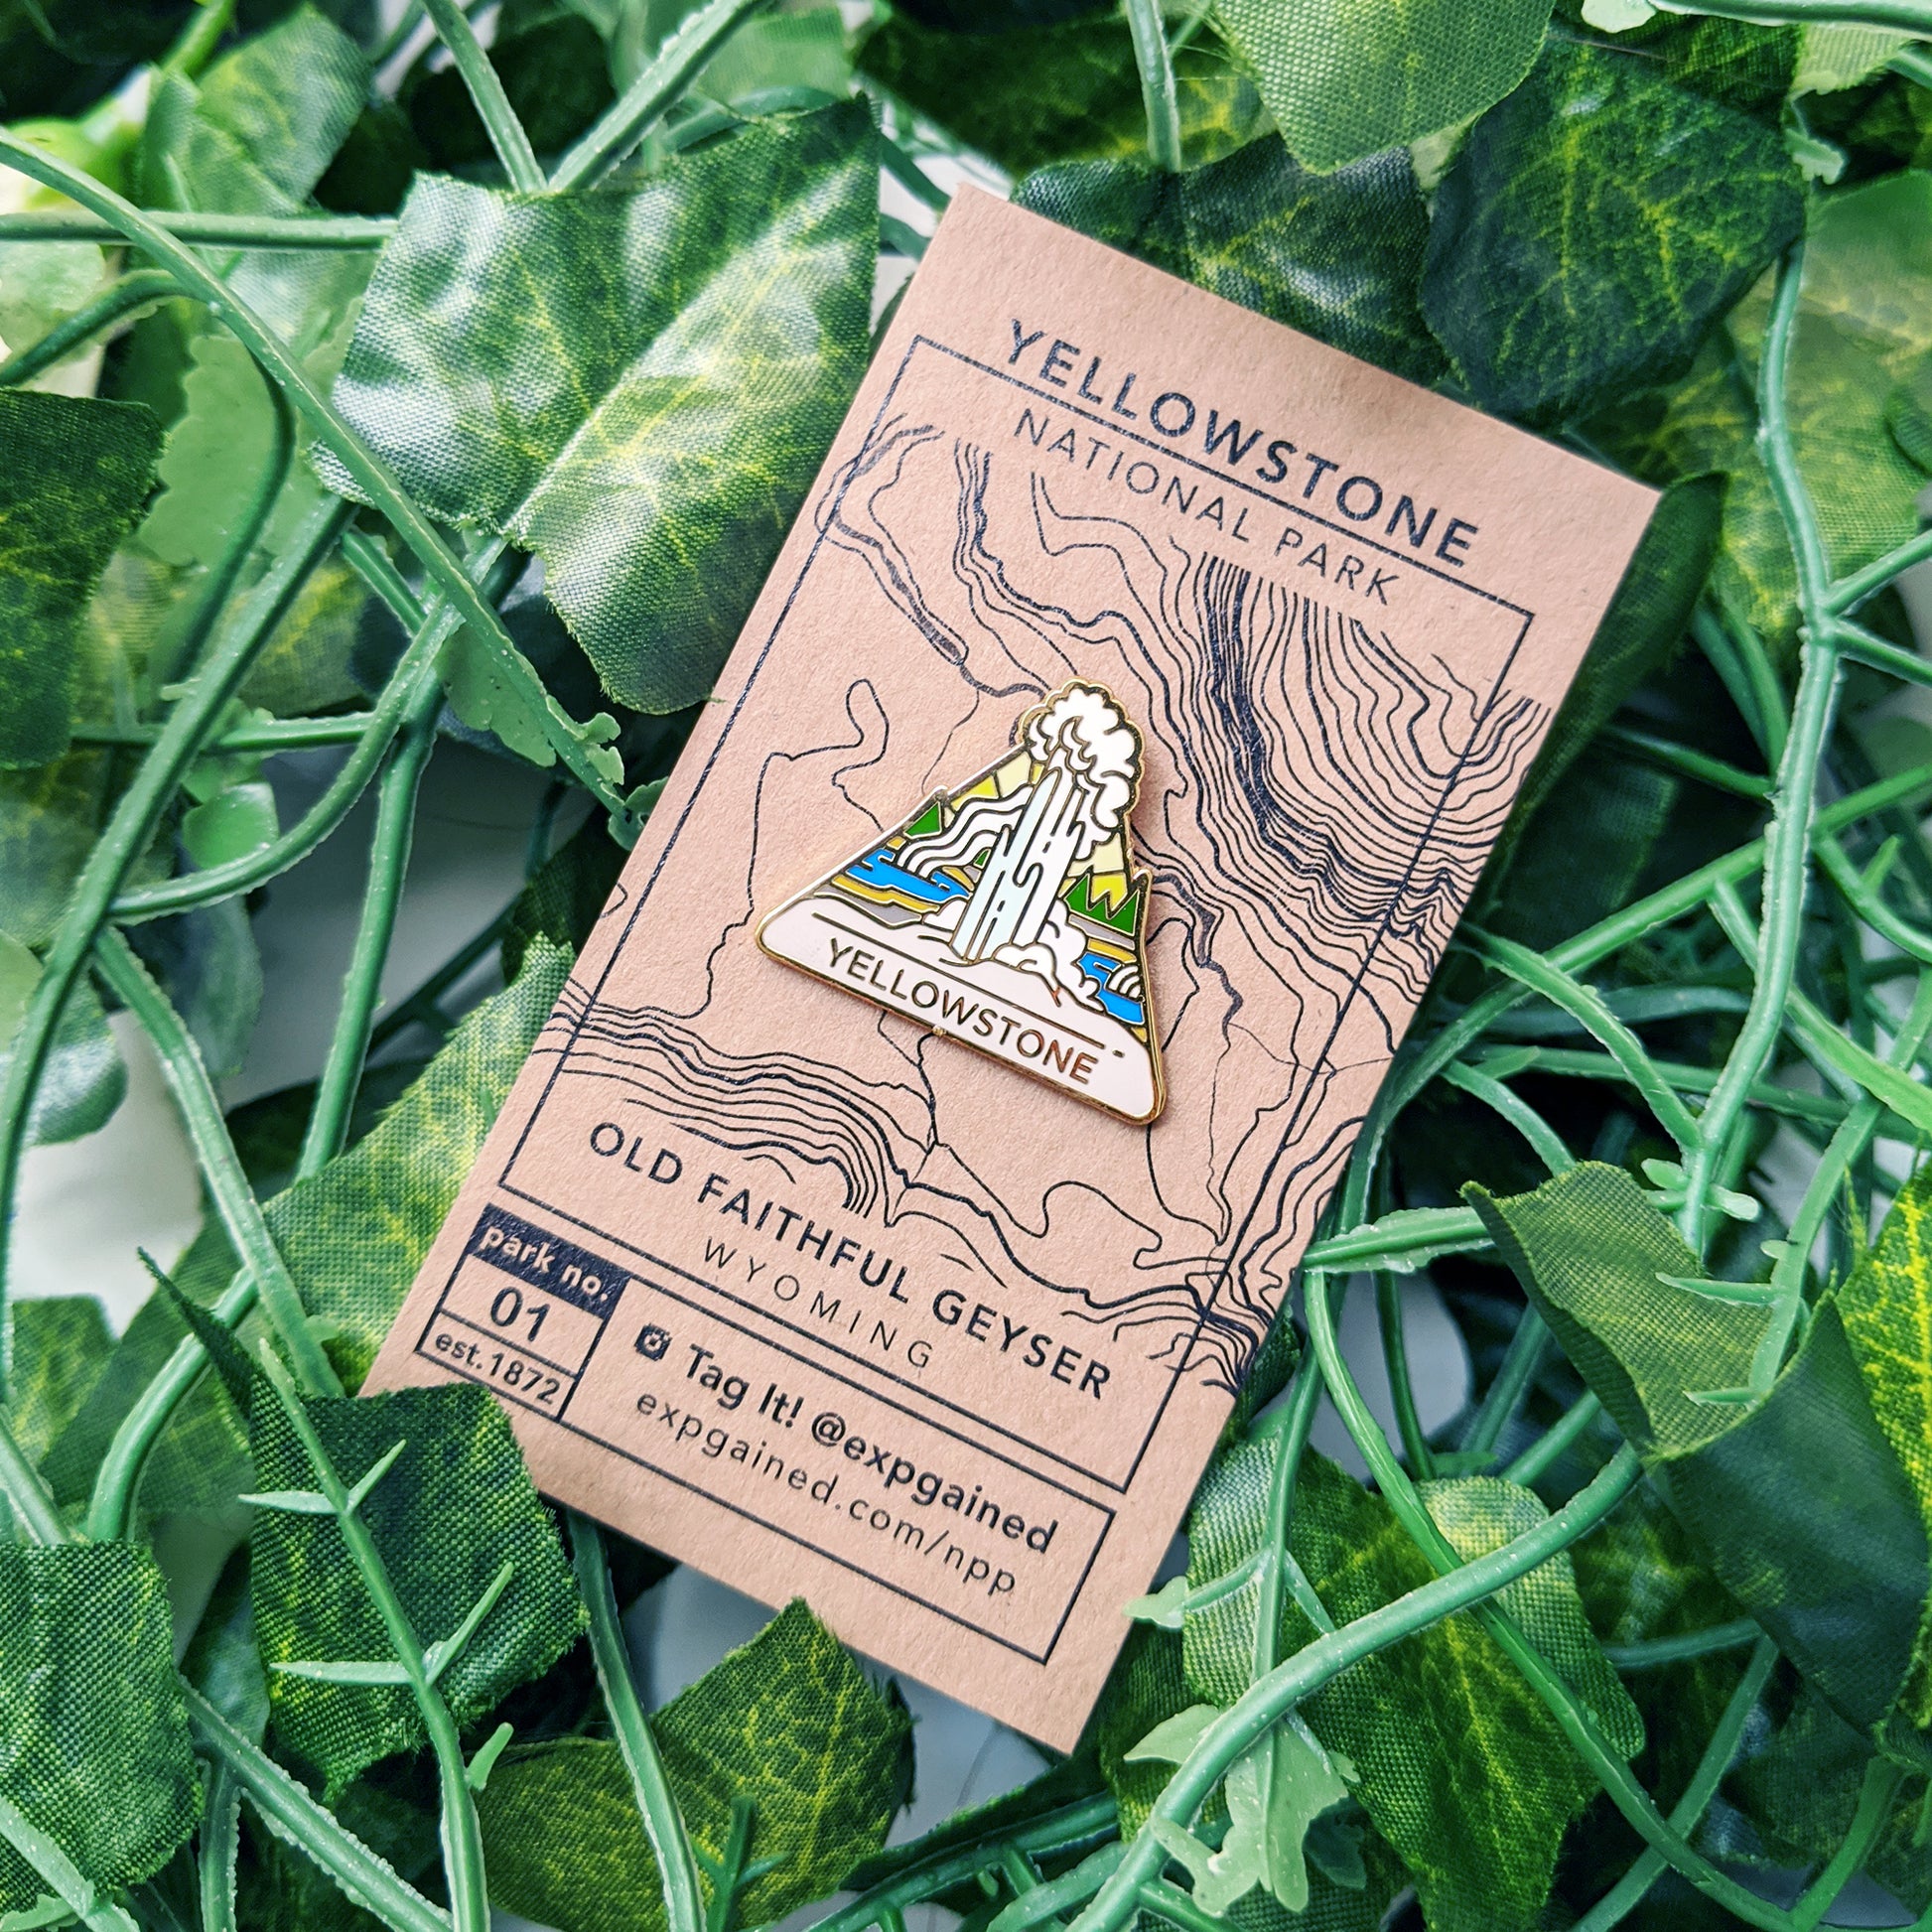 Triangle Yellowstone national park enamel pin featuring a view from the beehive hike on a brown business card size backing card with a topo map of Old Faithful Geyser location.